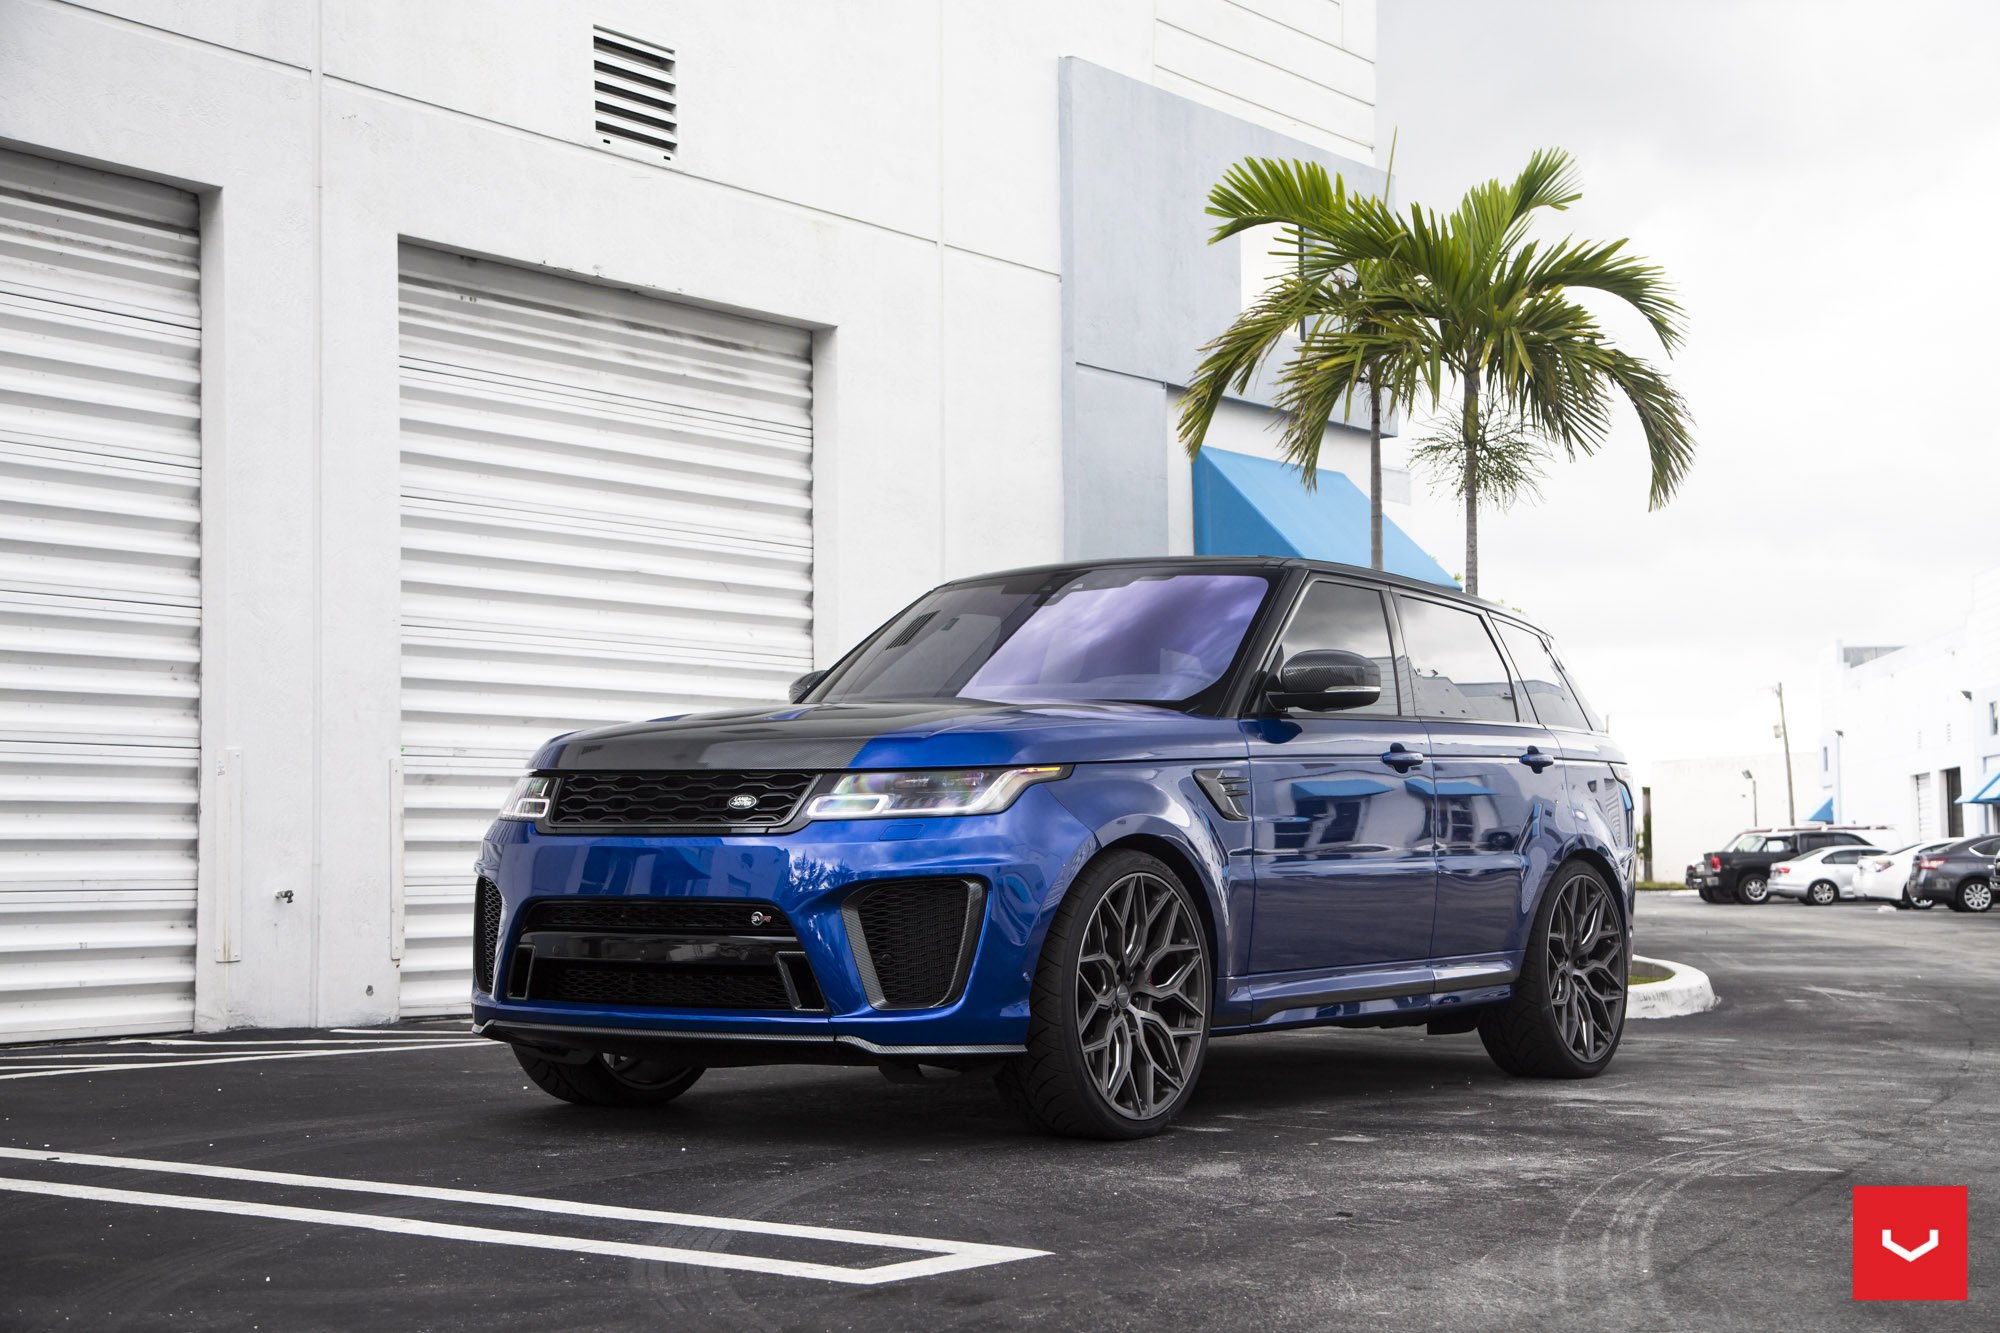 Custom Blue Range Rover Sport with Carbon Fiber Accents - Photo by Vossen